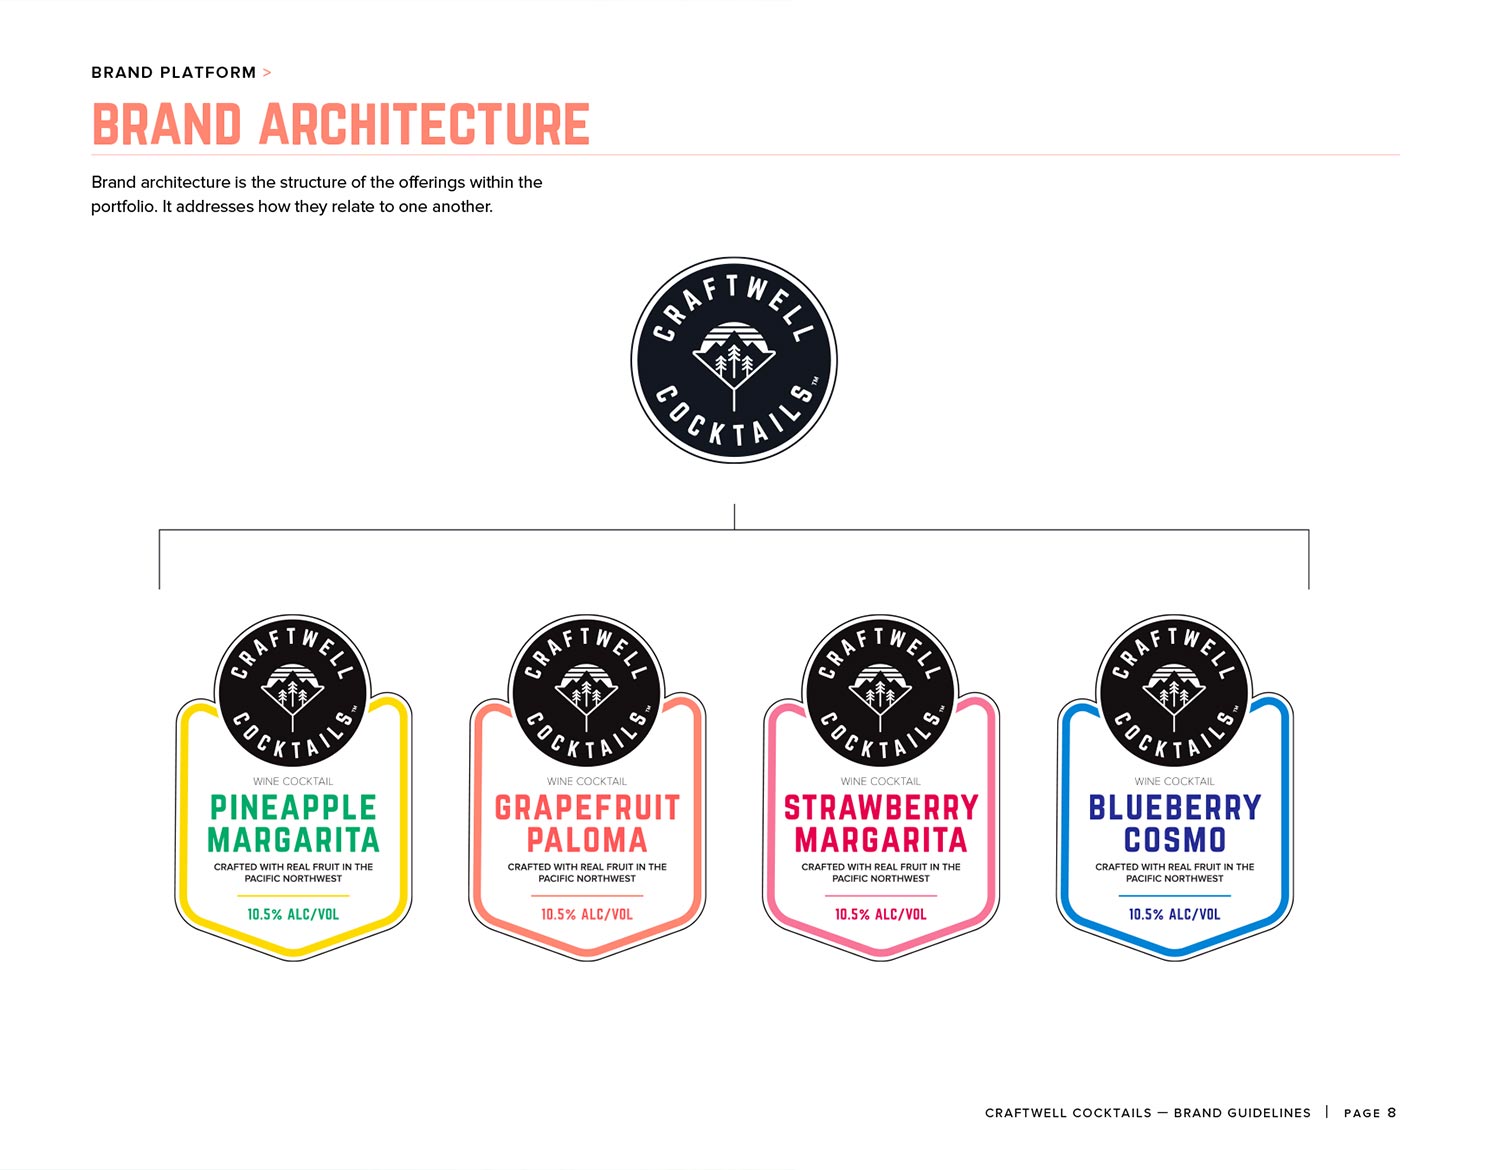 Craftwell Cocktails brand guidelines brand architecture page